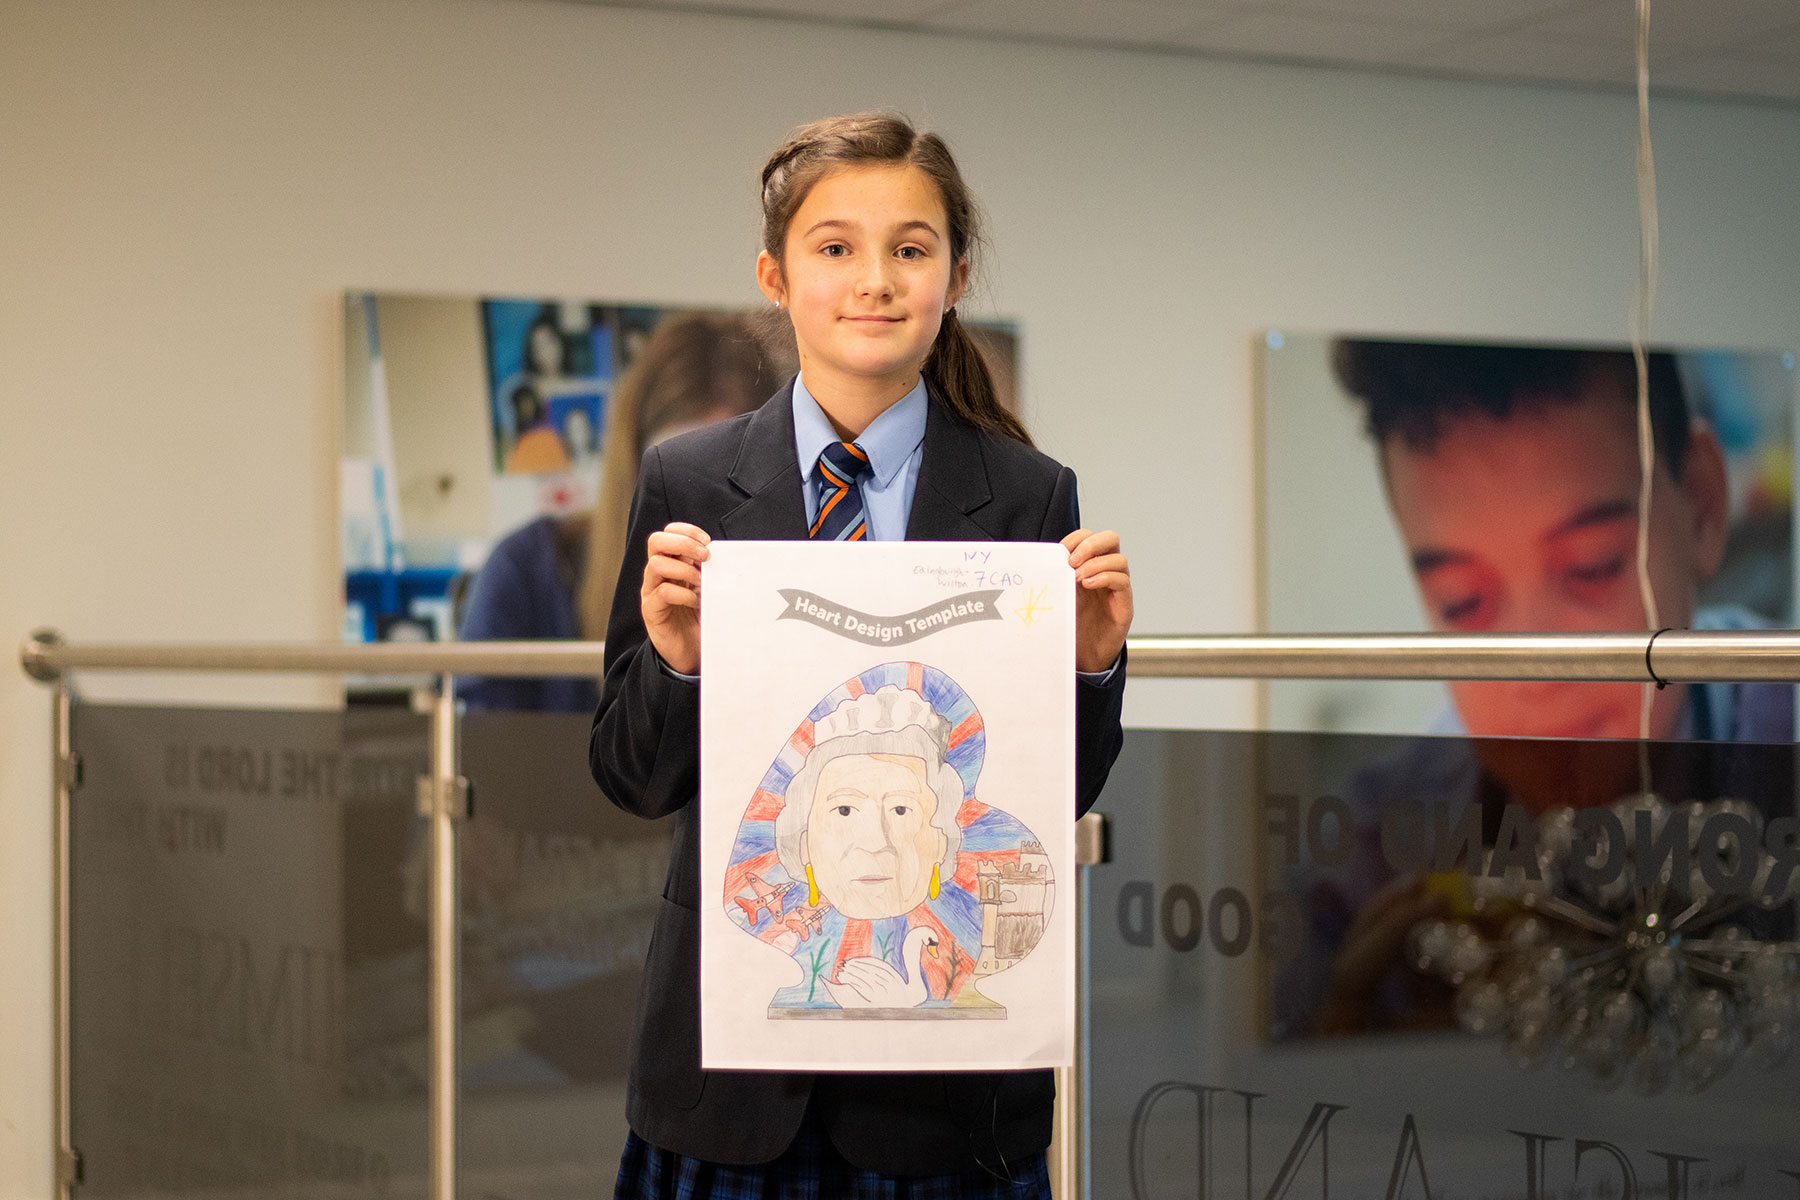 Young girl with brown hair and navy blue school uniform, holding drawing of heart shape